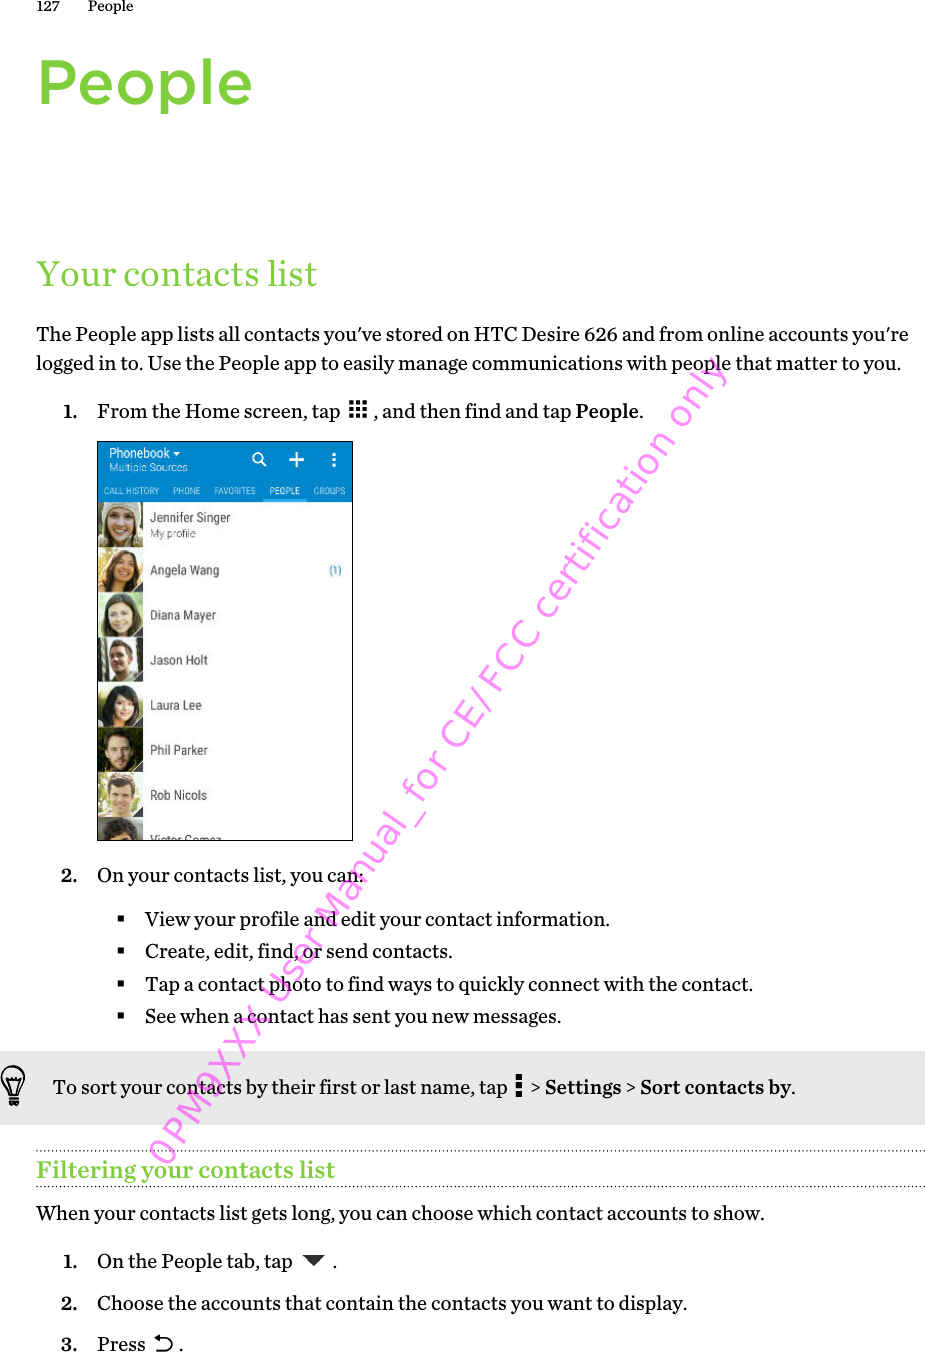 PeopleYour contacts listThe People app lists all contacts you&apos;ve stored on HTC Desire 626 and from online accounts you&apos;relogged in to. Use the People app to easily manage communications with people that matter to you.1. From the Home screen, tap  , and then find and tap People. 2. On your contacts list, you can:§View your profile and edit your contact information.§Create, edit, find, or send contacts.§Tap a contact photo to find ways to quickly connect with the contact.§See when a contact has sent you new messages.To sort your contacts by their first or last name, tap   &gt; Settings &gt; Sort contacts by.Filtering your contacts listWhen your contacts list gets long, you can choose which contact accounts to show.1. On the People tab, tap  .2. Choose the accounts that contain the contacts you want to display.3. Press  .127 People0PM9XXX User Manual_for CE/FCC certification only